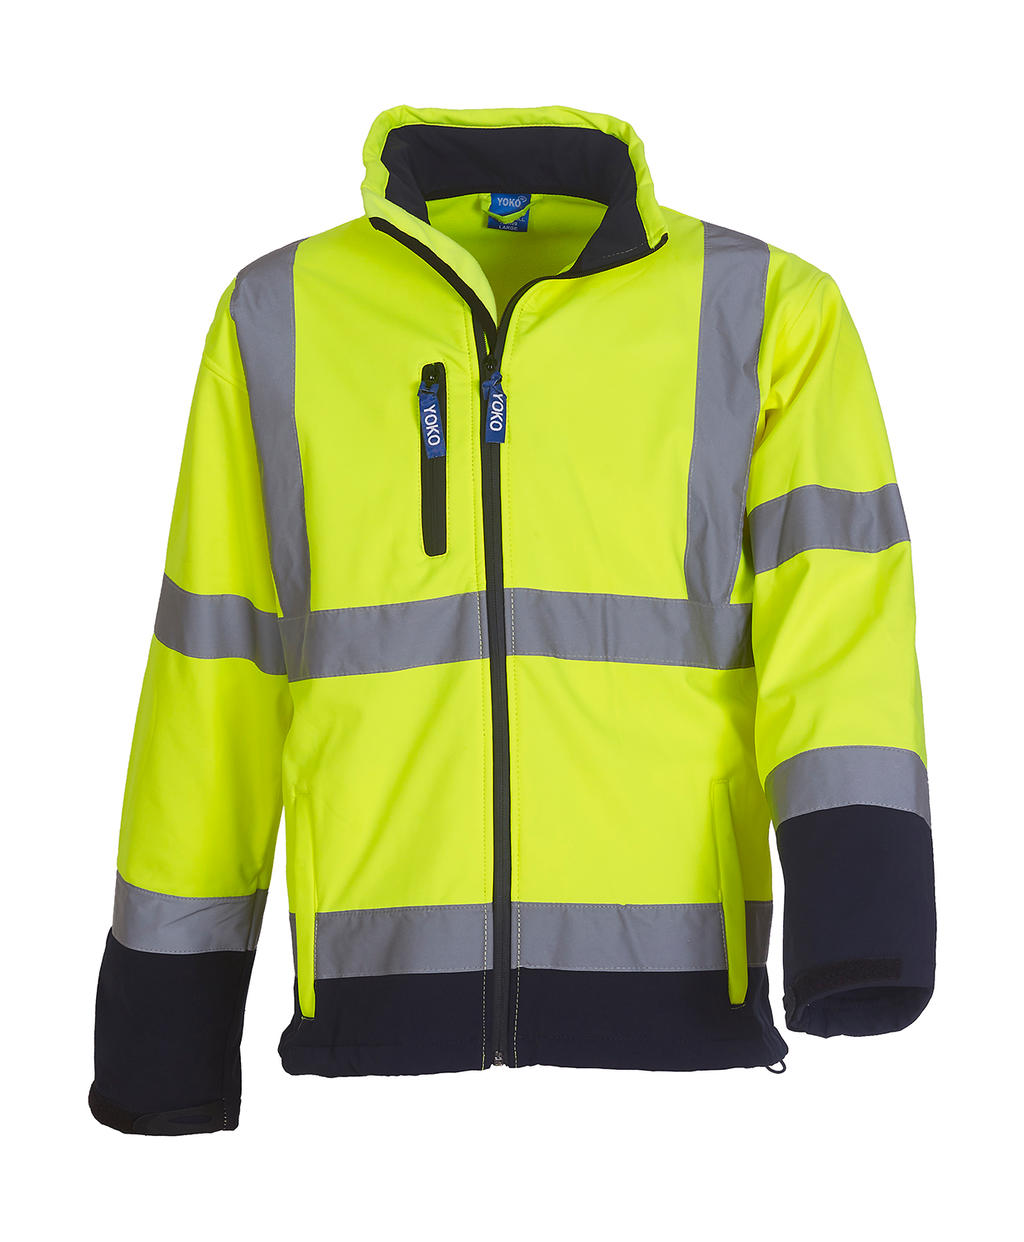  Fluo Softshell Jacket in Farbe Fluo Yellow/Navy